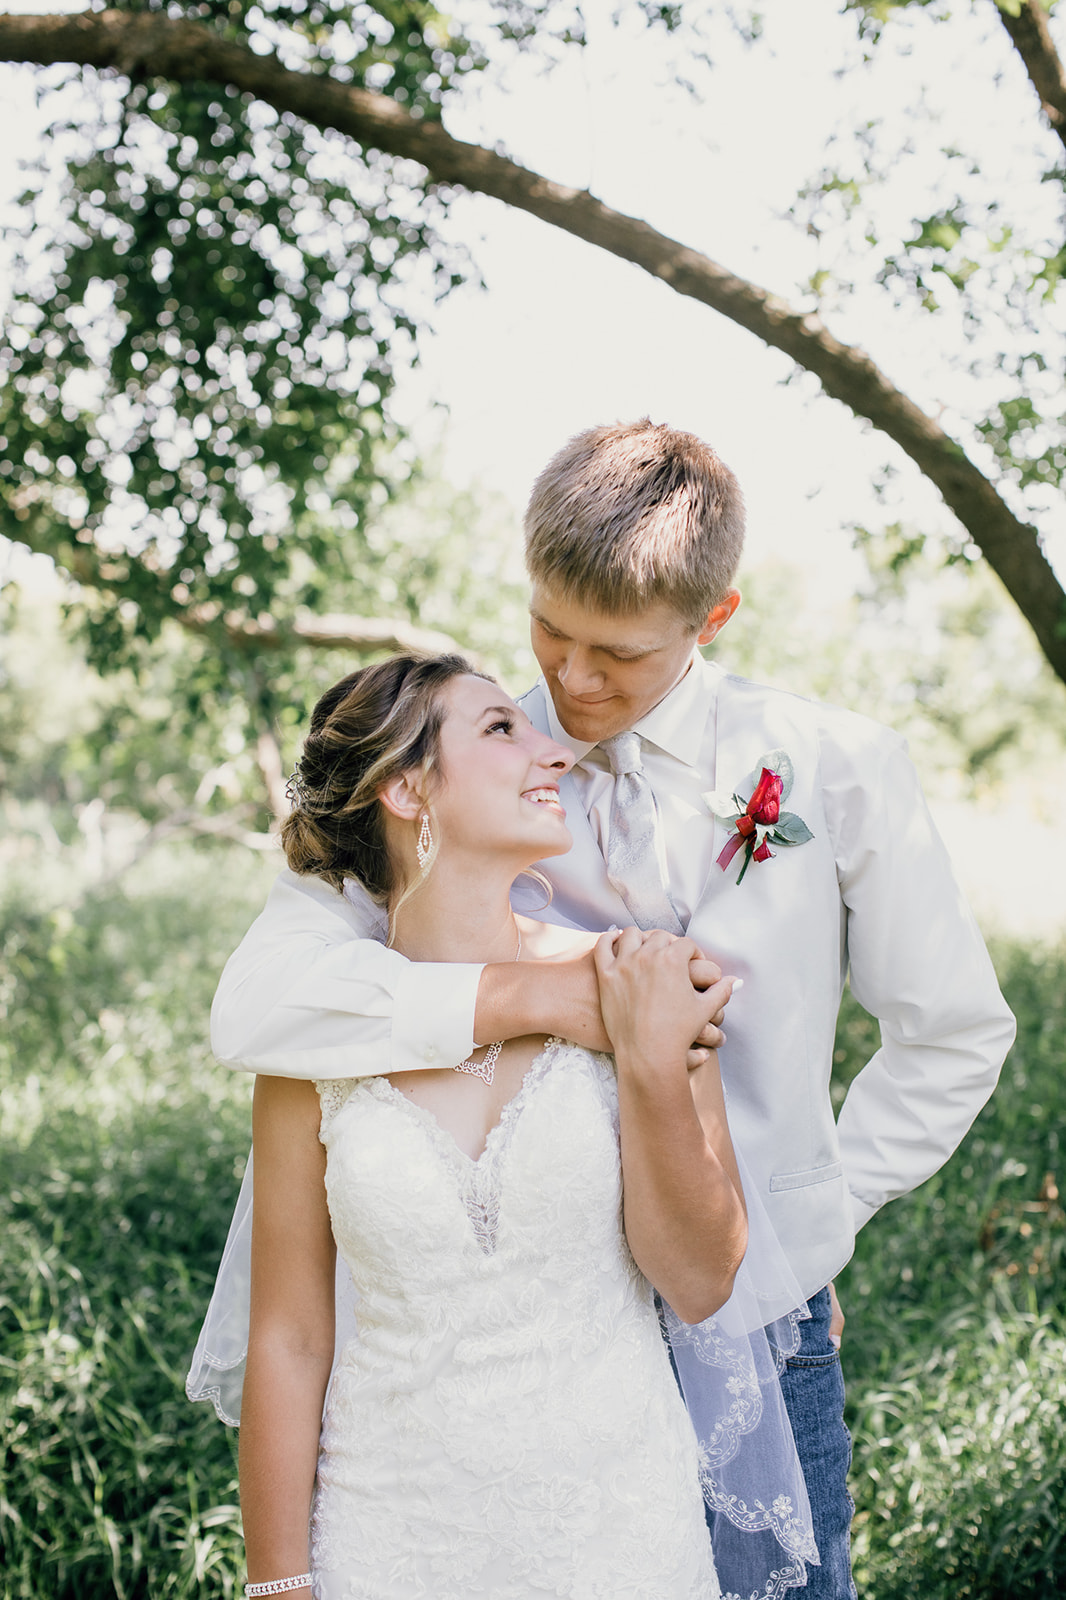 Sheyenne River Bend Farms Wedding, Valley city, Nd by Abigail Maki Photography. Includes bridal fashion, wedding inspiration and wedding details. Book your San Fransico wedding and browse the blog for more inspiration #wedding #photography #weddingphotography #sanfranciscophotographer